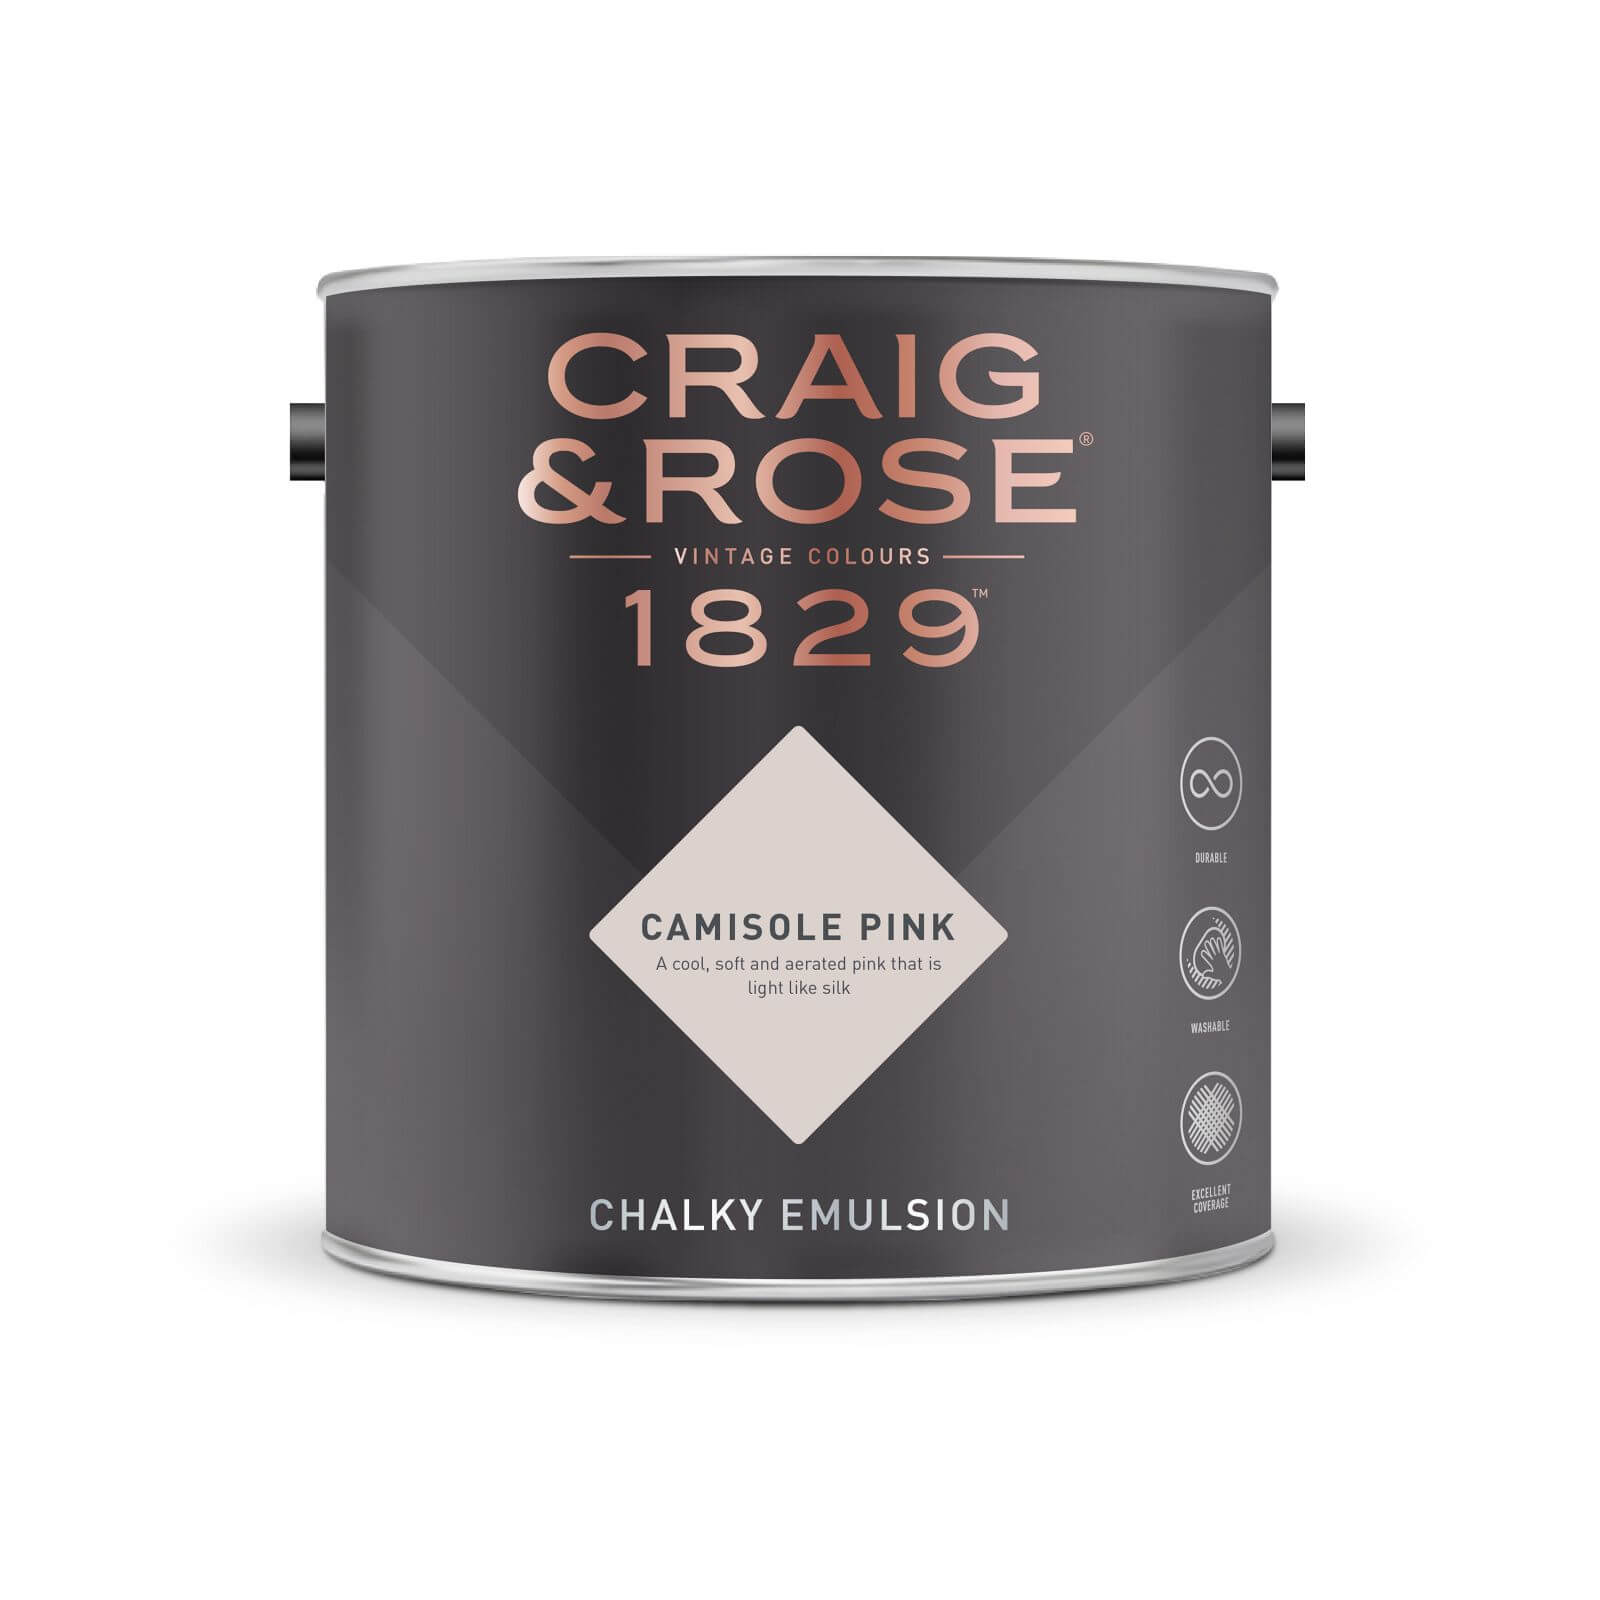 Craig & Rose 1829 Chalky Emulsion Paint Camisole Pink - 2.5L